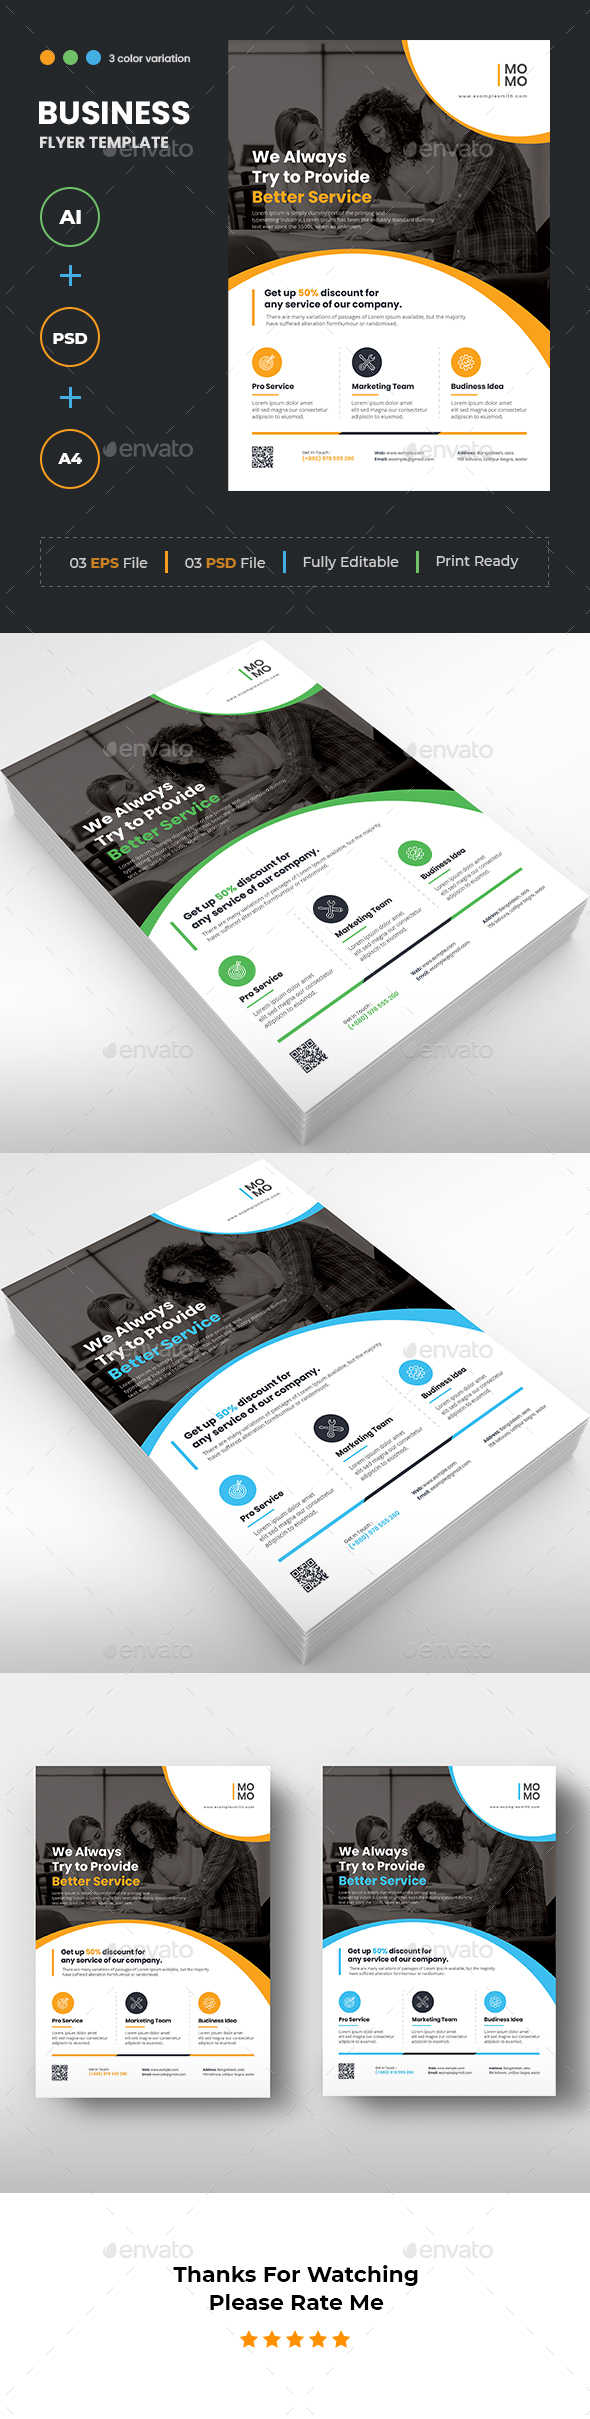 [DOWNLOAD]Business Poster Template